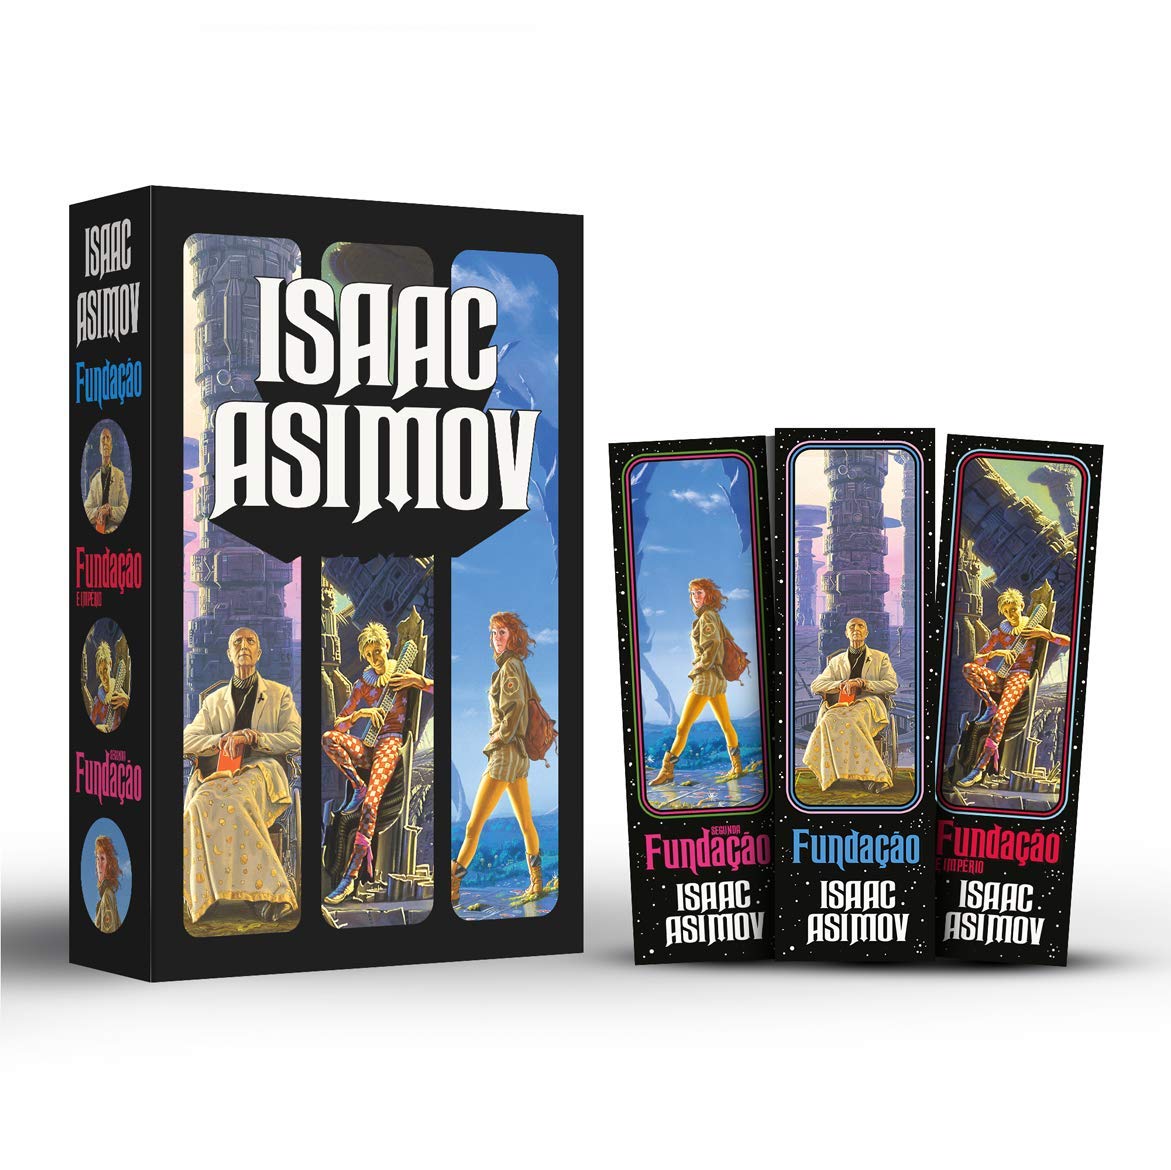 Image: Foundation Trilogy Box + 3 Special Bookmarks by Isaac Asimov